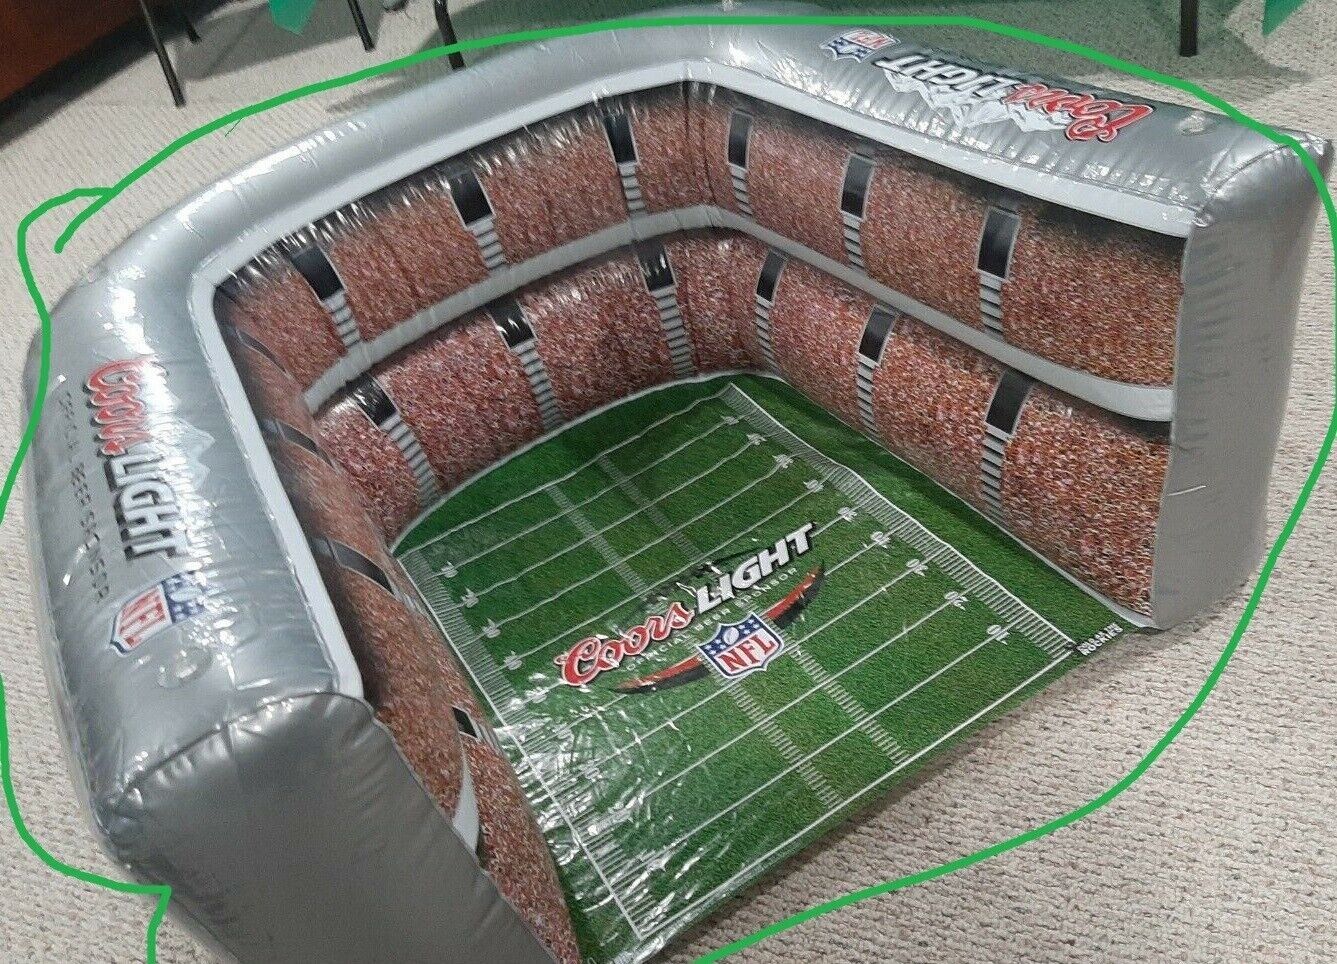 New Coors Light Inflatable NFL Football Stadium Chair